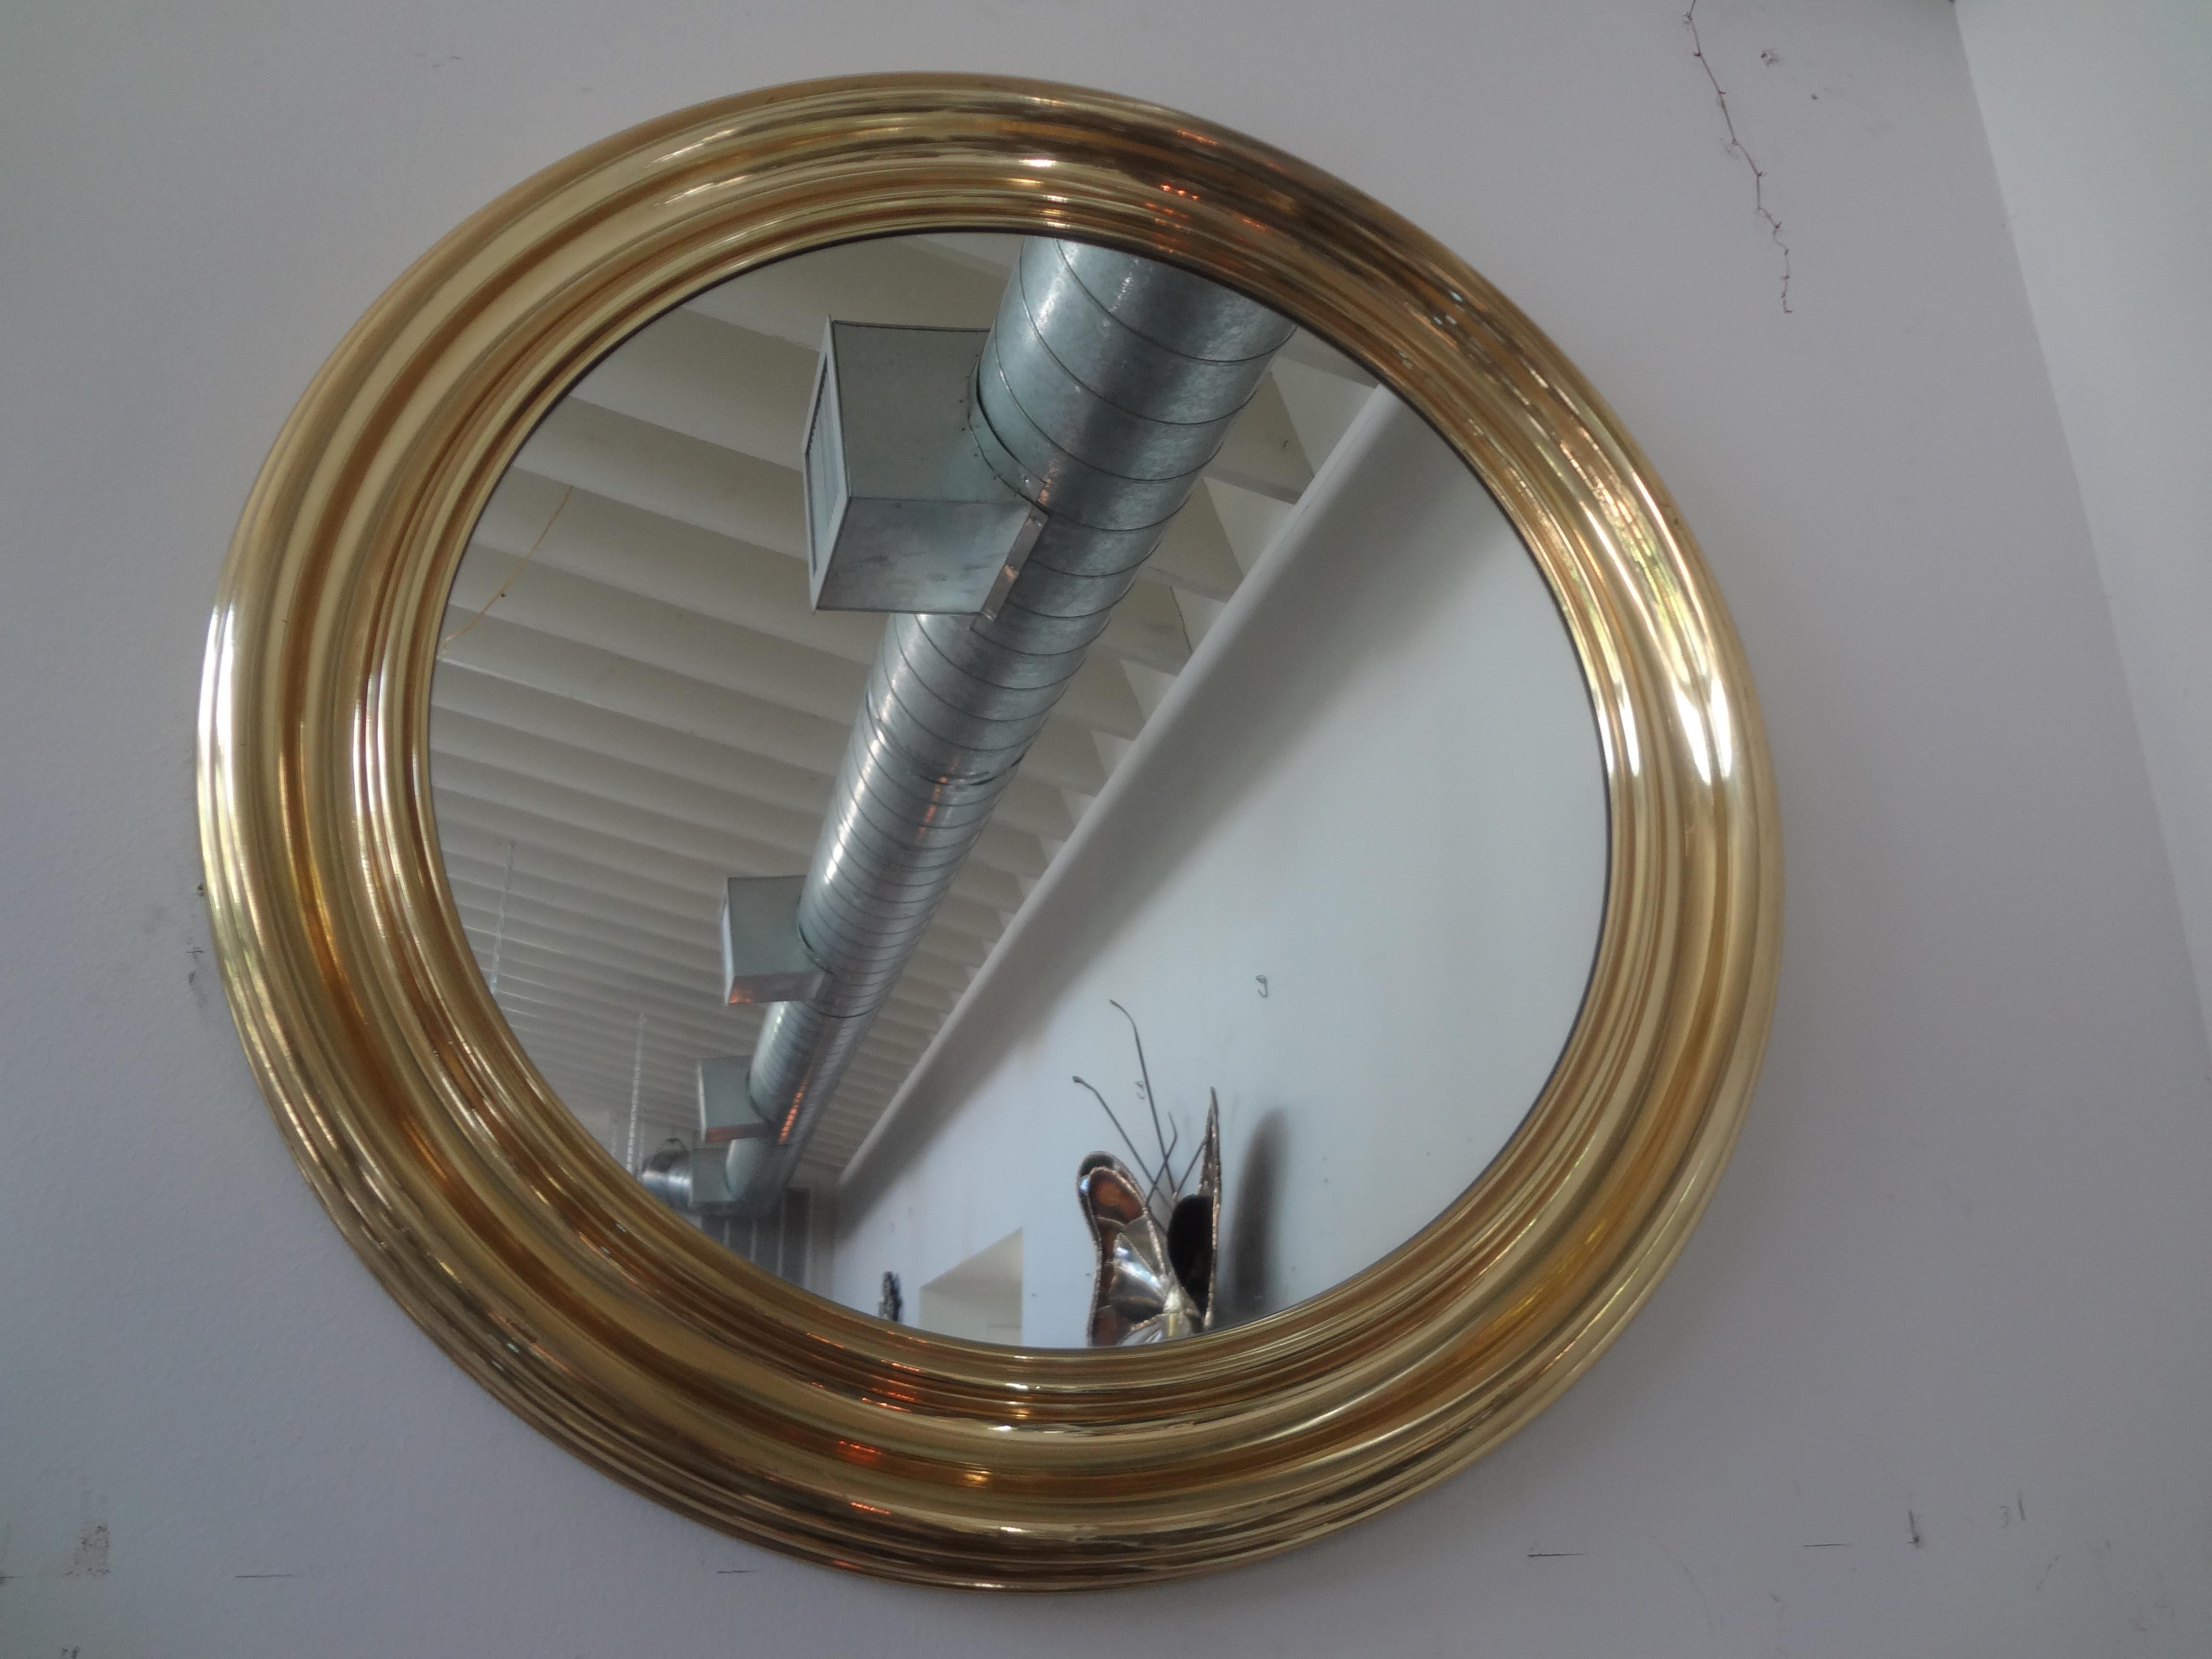 Vintage Italian round brass mirror.
This lovely Italian modern Gio Ponti inspired round brass mirror dates to the 1960's and has a great patina.
Perfect for a powder room or hall.